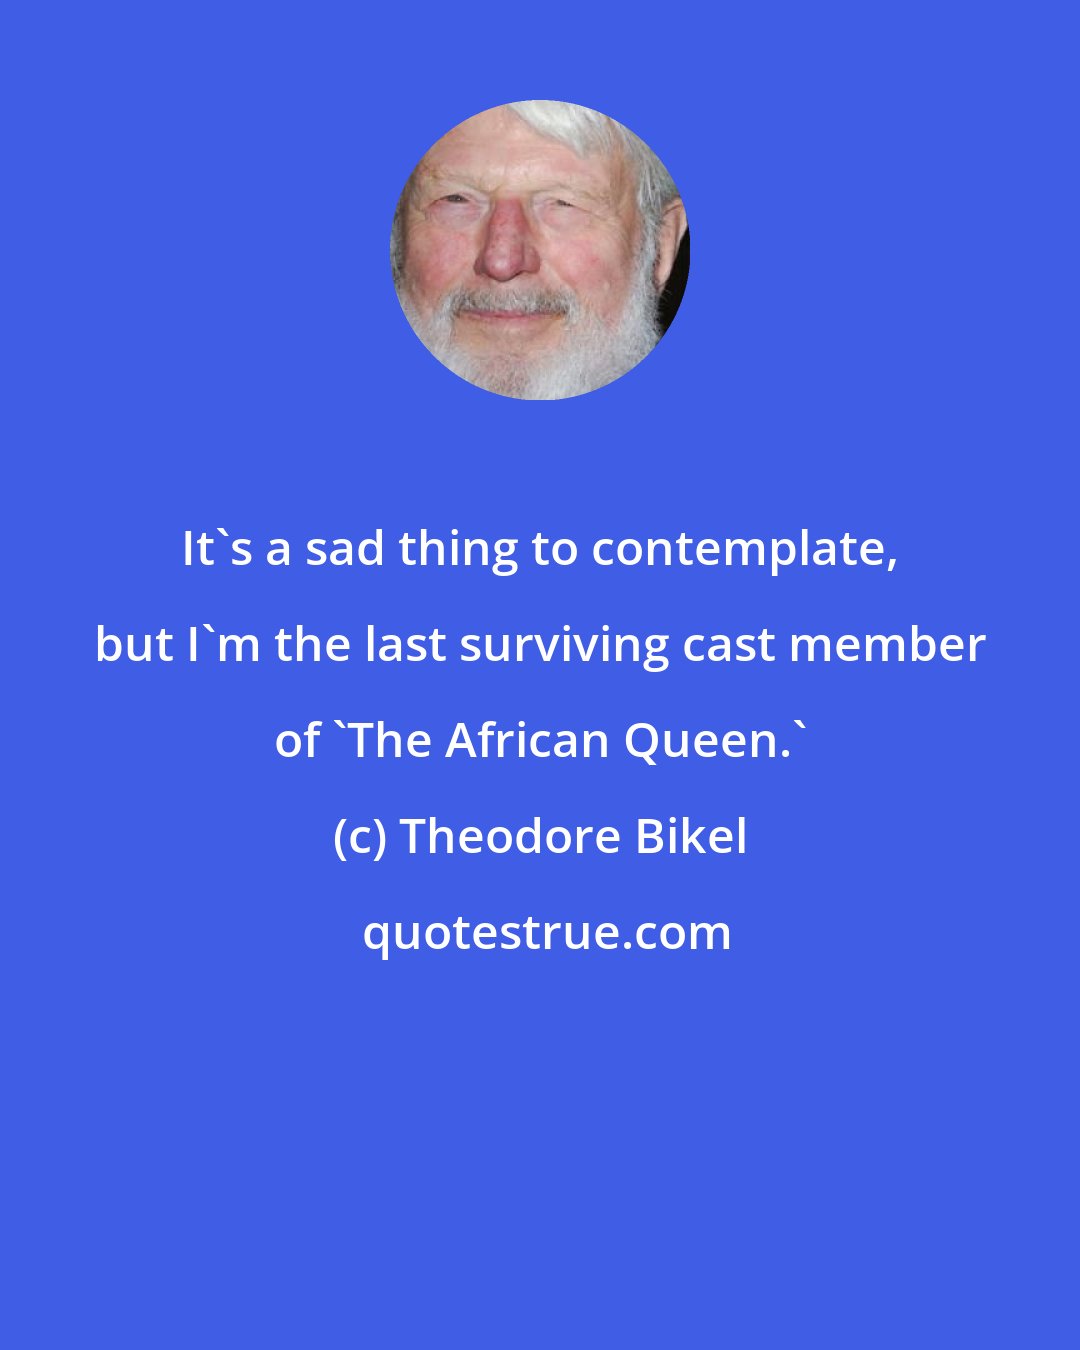 Theodore Bikel: It's a sad thing to contemplate, but I'm the last surviving cast member of 'The African Queen.'